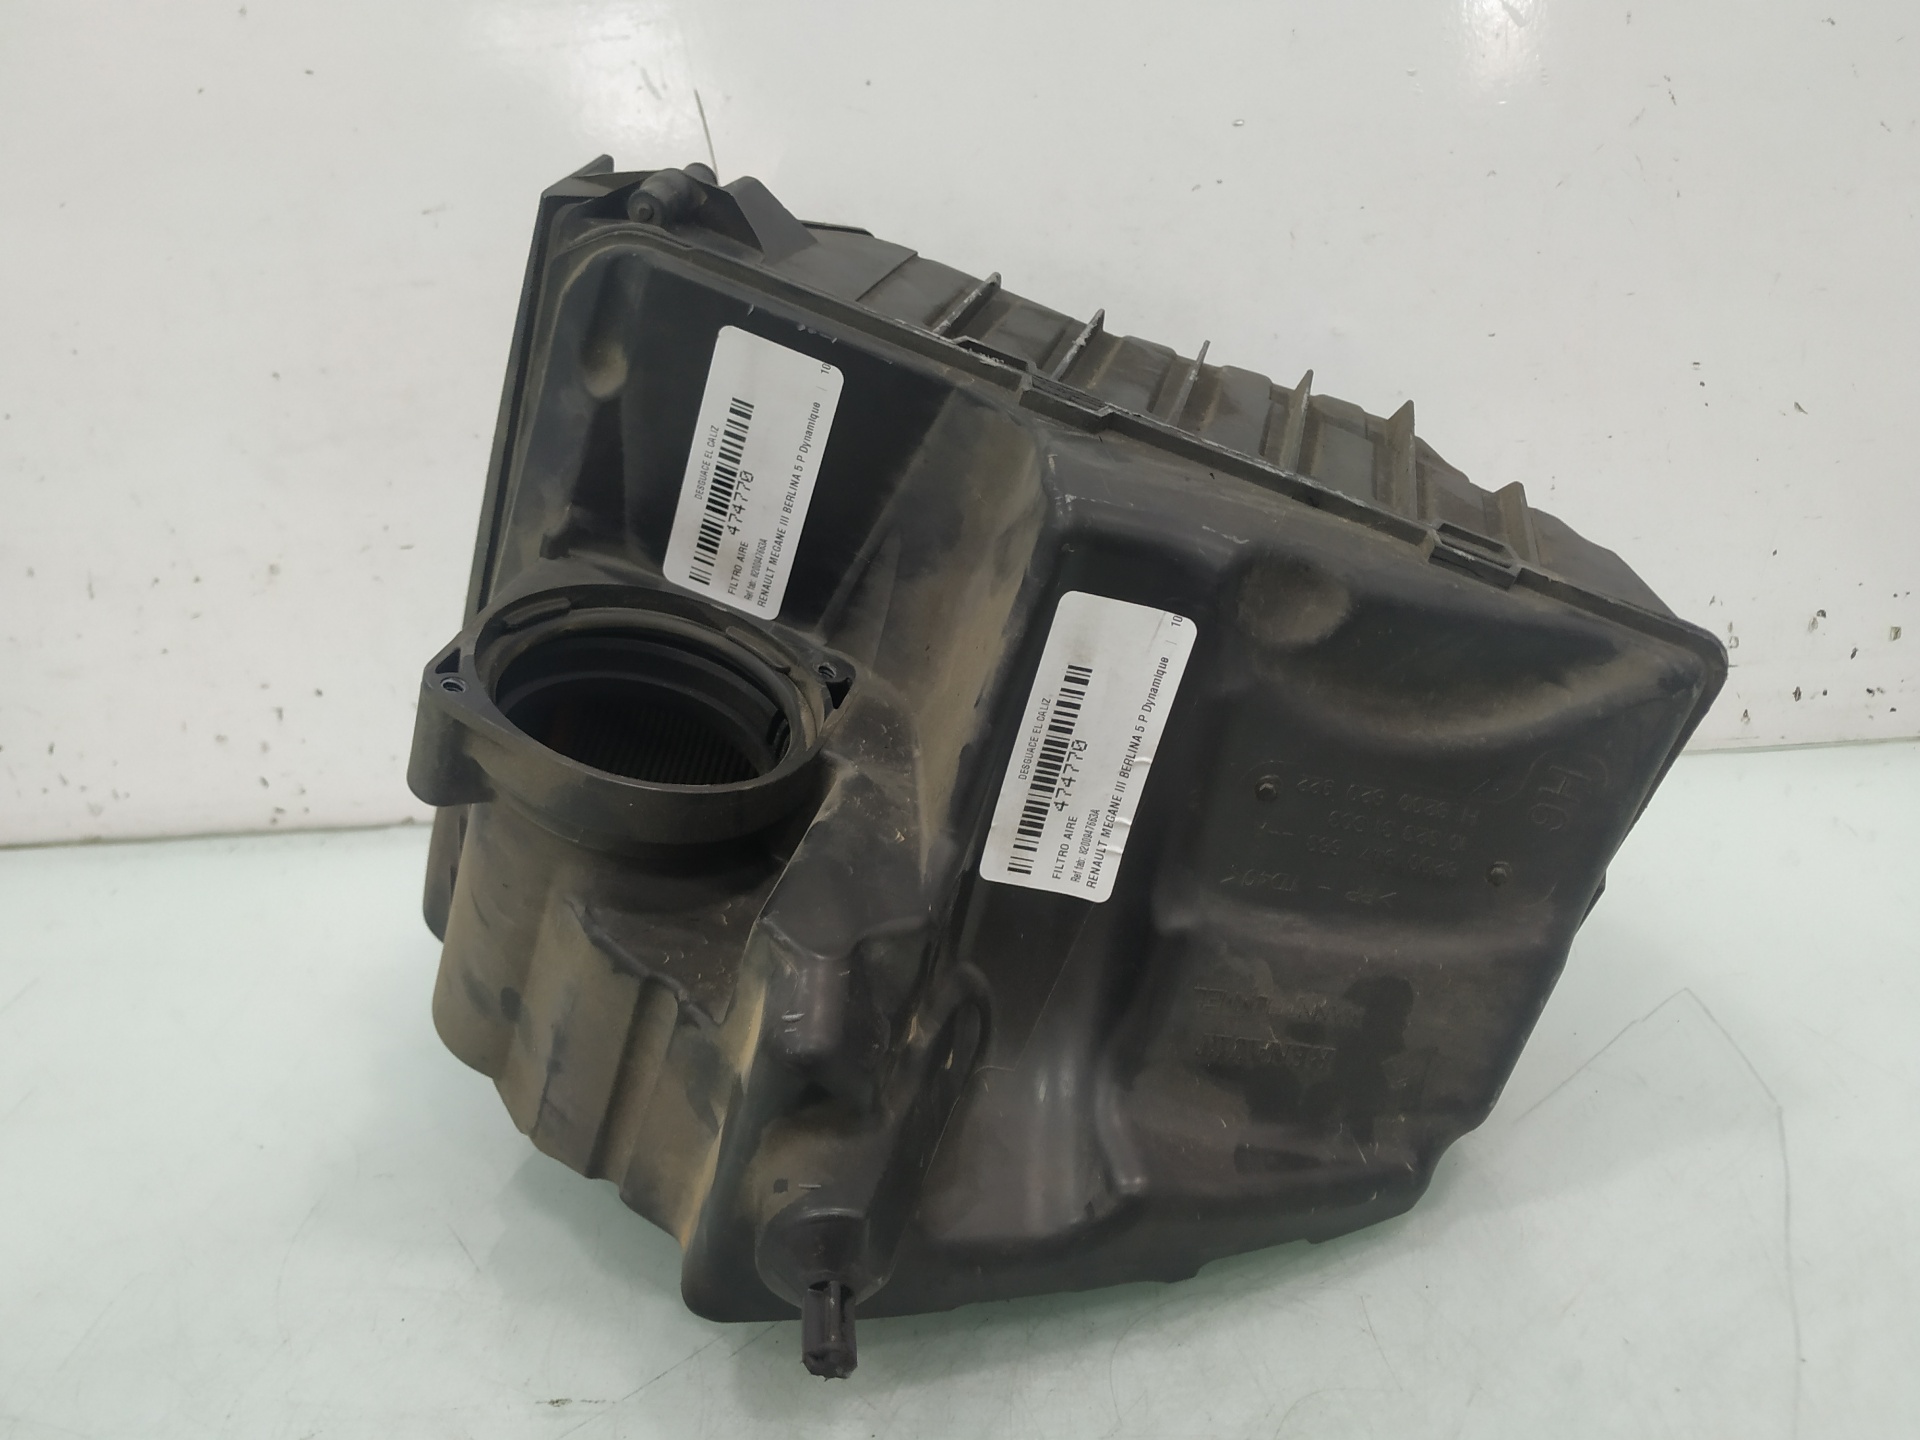 VAUXHALL Megane 3 generation (2008-2020) Other Engine Compartment Parts 8200947663A 25213176